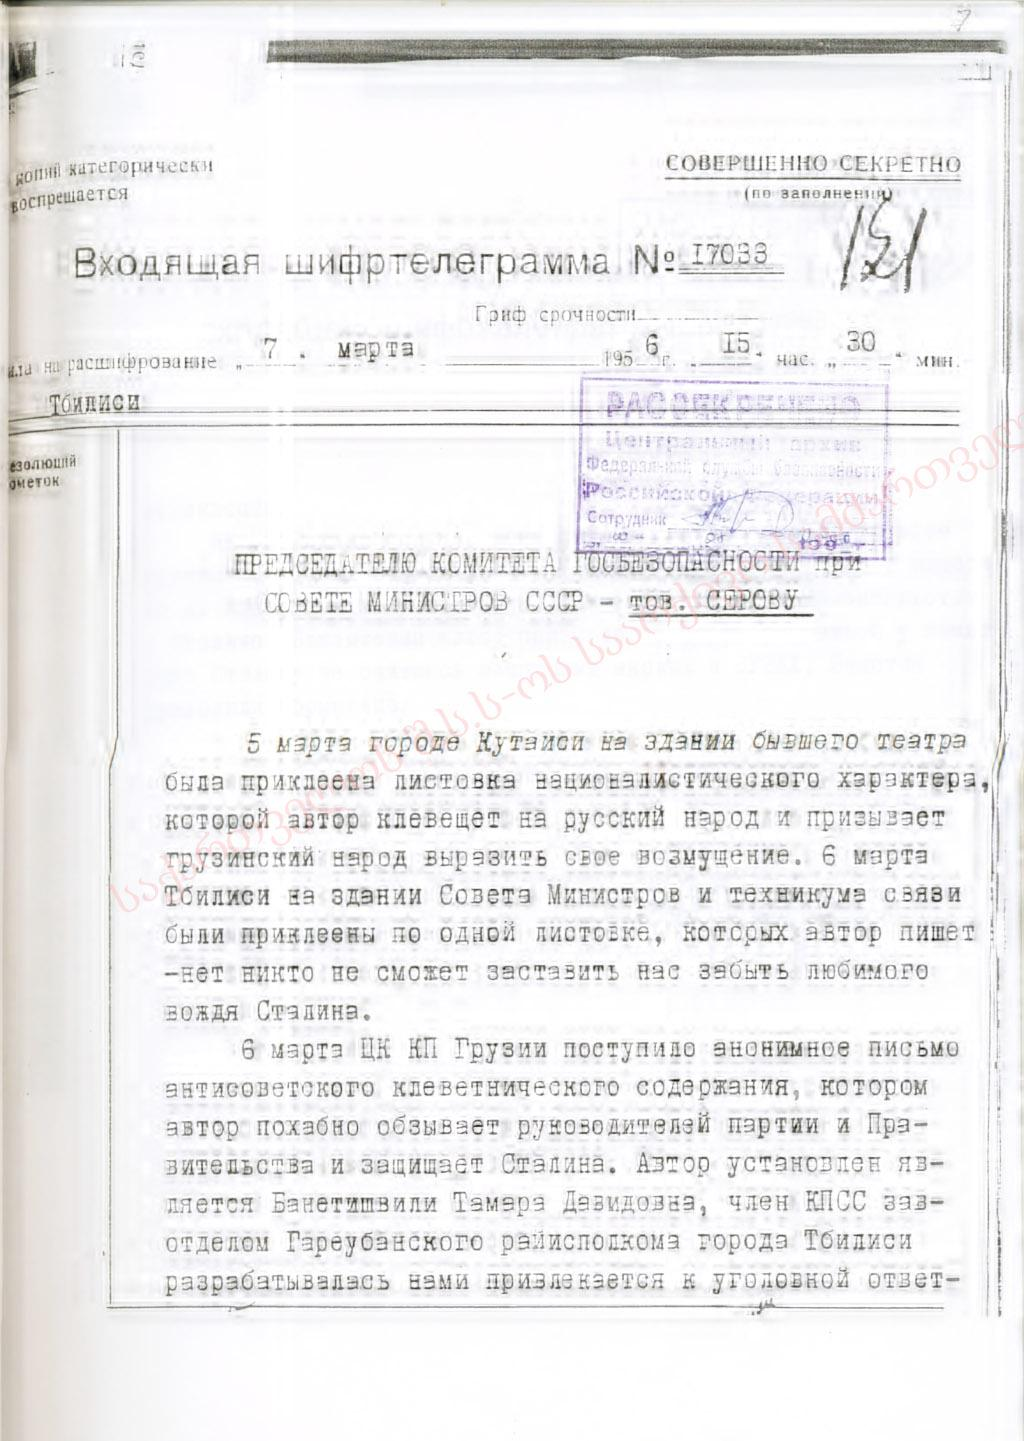 The Top Secret letter, sent to Moscow by the Major General A. Inauri, Chairman of the Committee for State Security (KGB) at the Council of Ministers of the Georgian SSR, informs about the proclamations distributed in Tbilisi and Kutaisi and anonymous letters with anti-Soviet content delivered to the Central Committee of the Communist Party of Georgia during the demonstrations of March 5-6th, 1956. № 17033